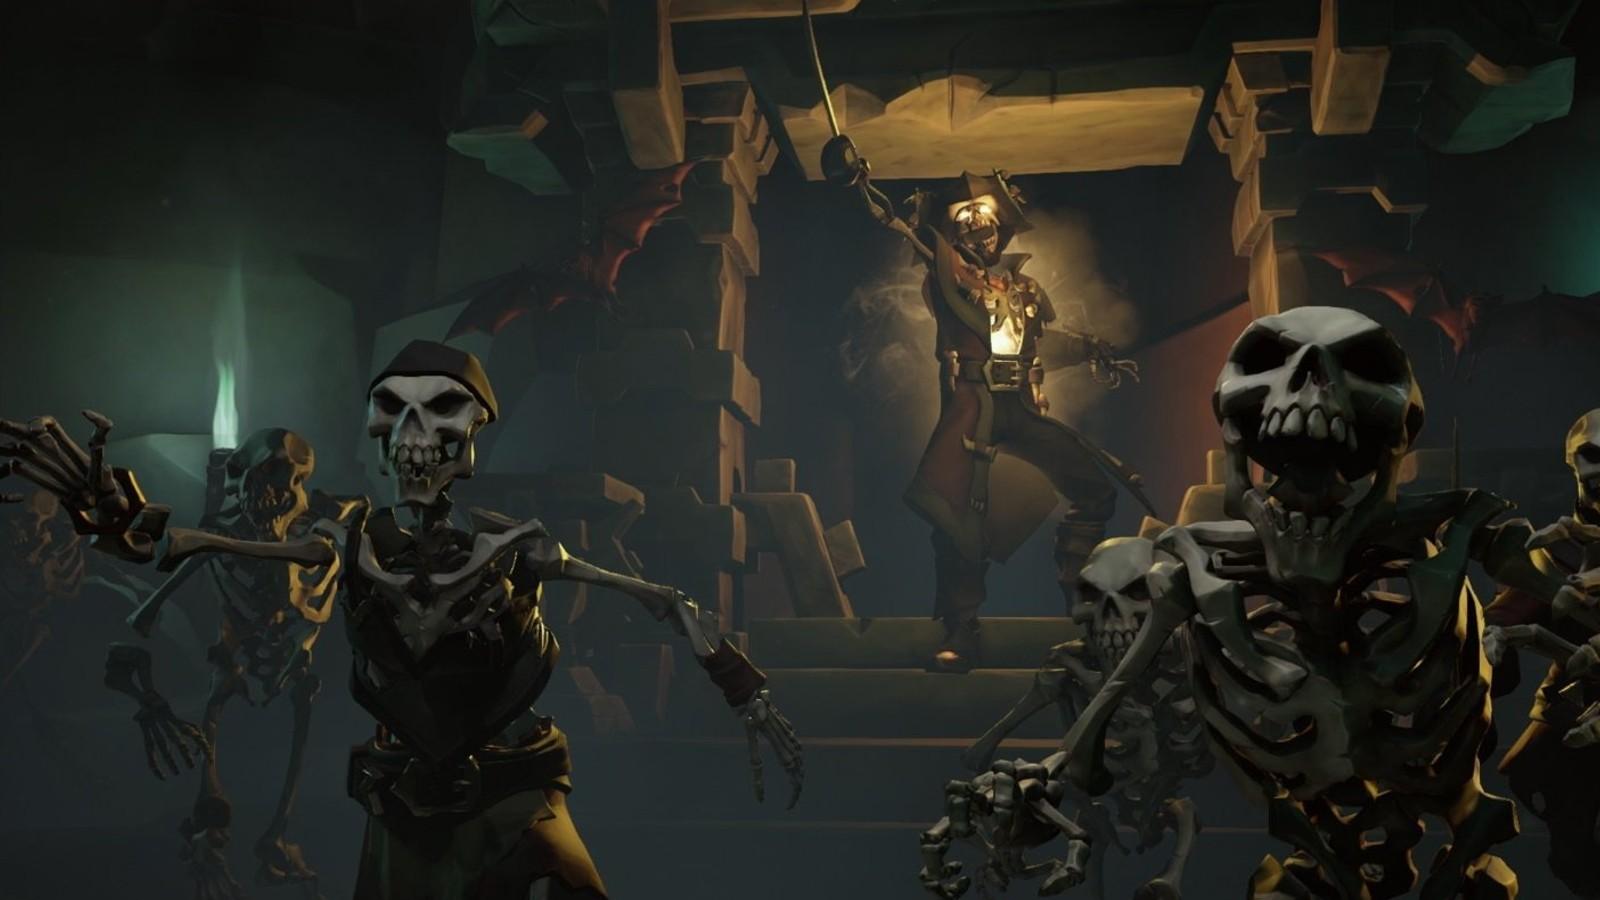 An image of Sea of Thieves key art featuring skeletons.